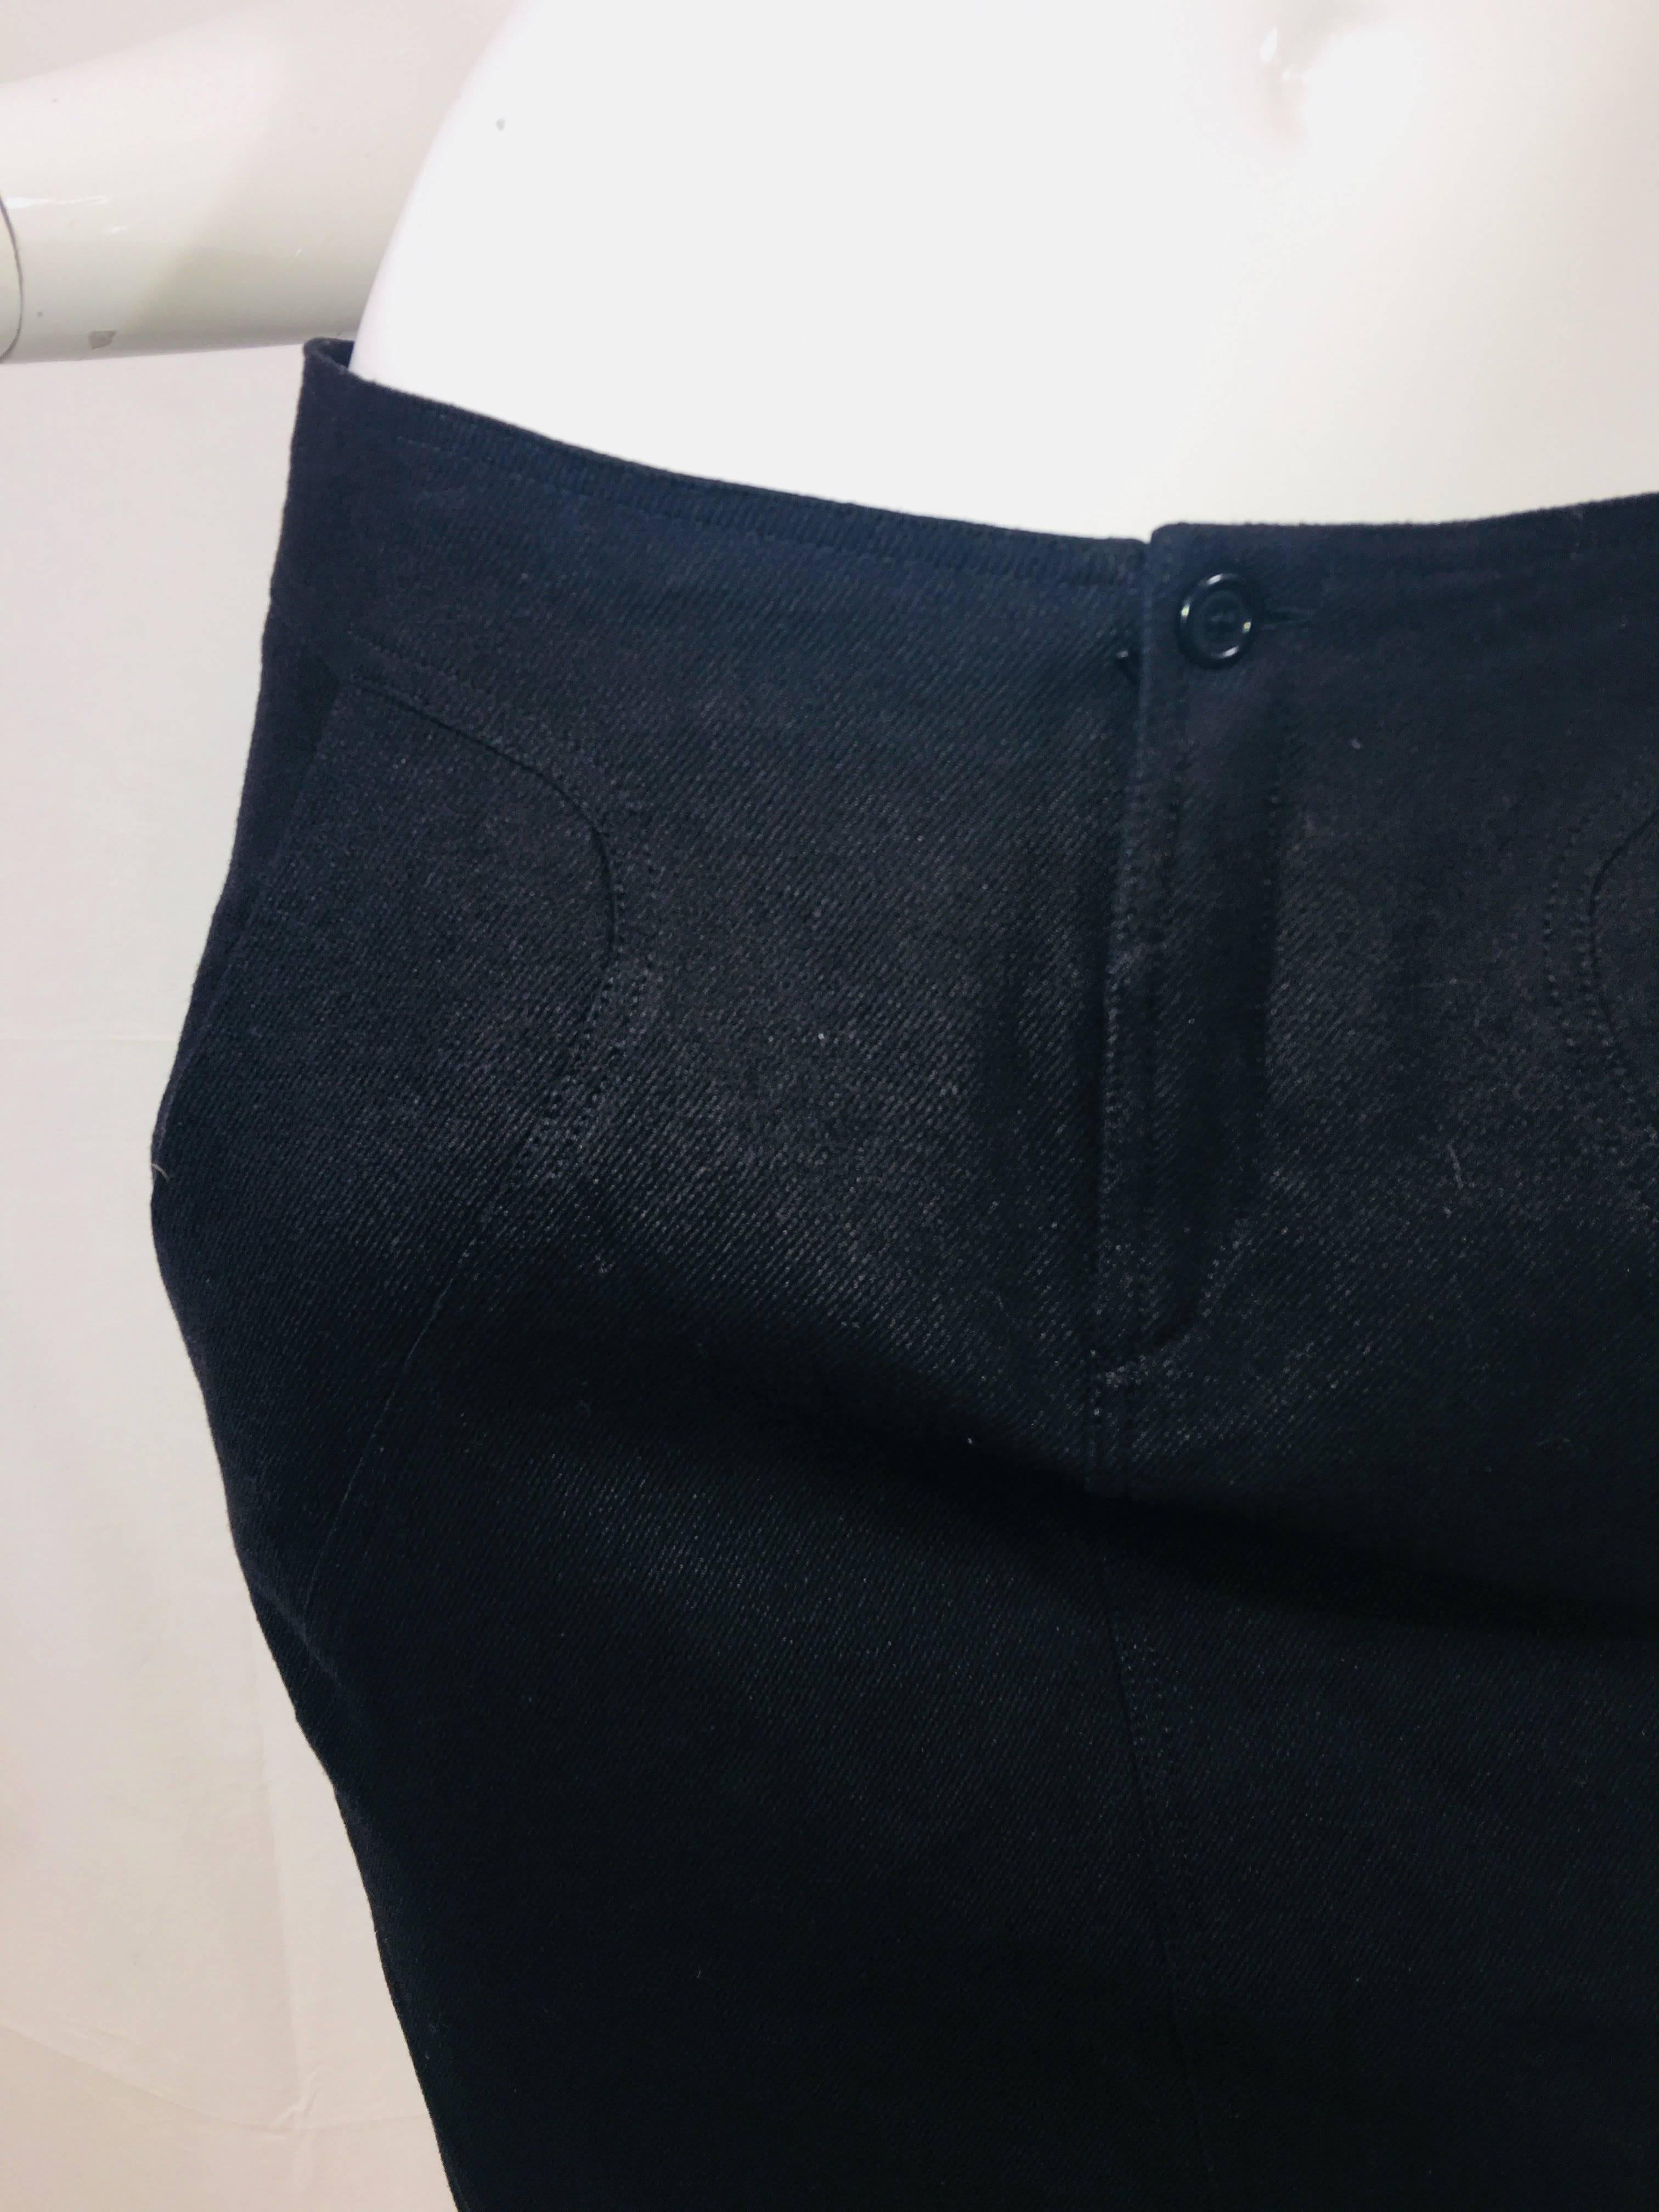 Urban Zen Wool Pencil Skirt in Black Wool with Front Pockets.